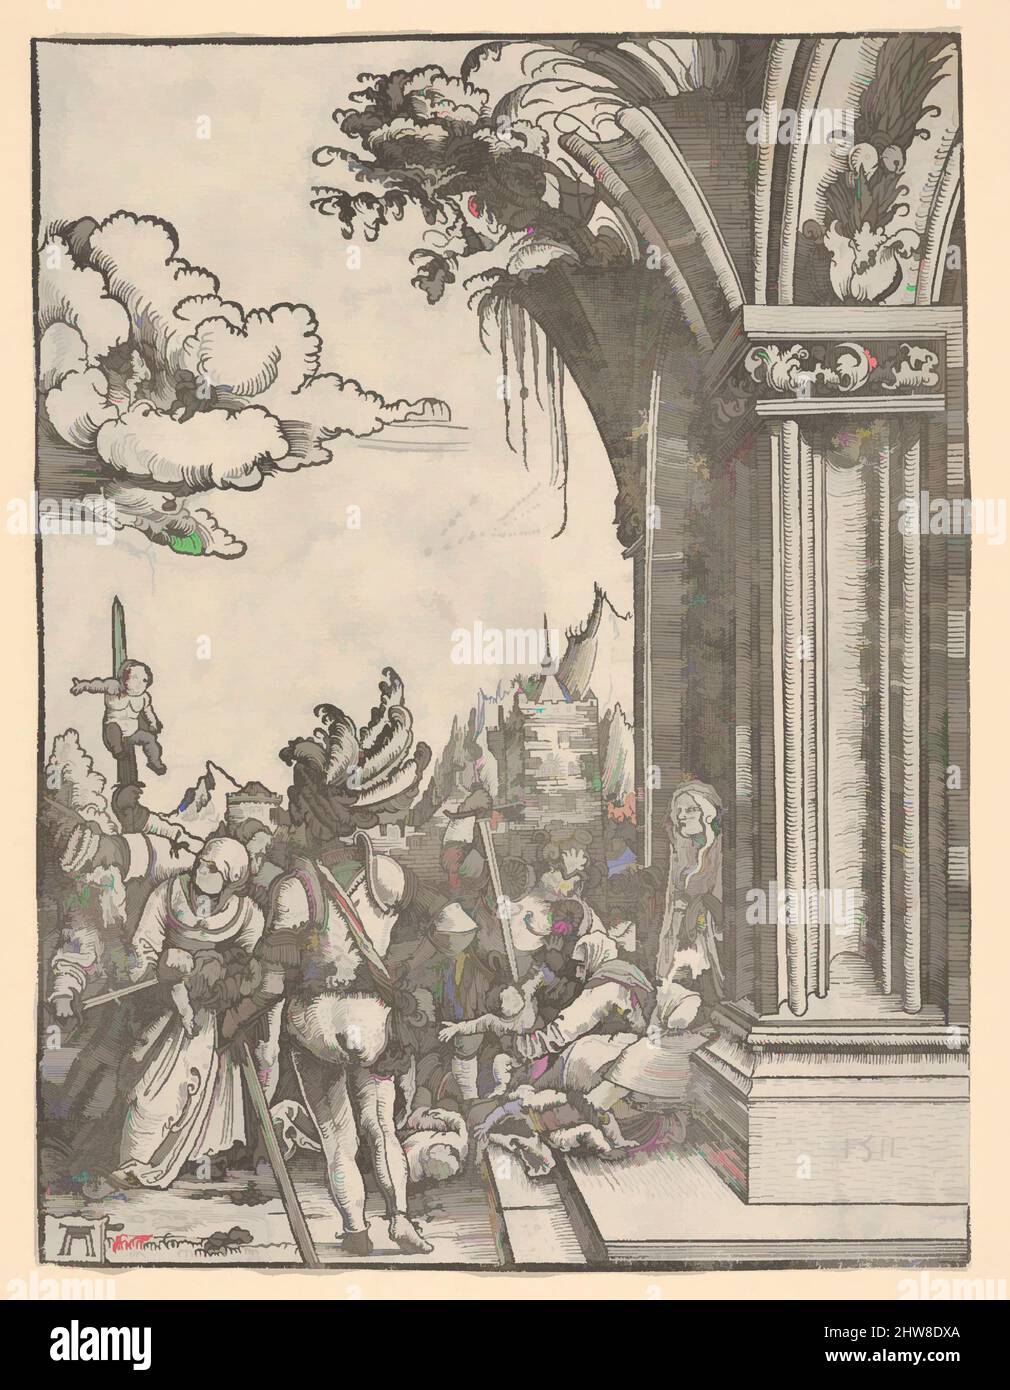 Art inspired by Massacre of the Innocents, 1511, Woodcut; first state of two (New Hollstein), Sheet: 7 9/16 × 5 3/4 in. (19.2 × 14.6 cm), Prints, Albrecht Altdorfer (German, Regensburg ca. 1480–1538 Regensburg, Classic works modernized by Artotop with a splash of modernity. Shapes, color and value, eye-catching visual impact on art. Emotions through freedom of artworks in a contemporary way. A timeless message pursuing a wildly creative new direction. Artists turning to the digital medium and creating the Artotop NFT Stock Photo